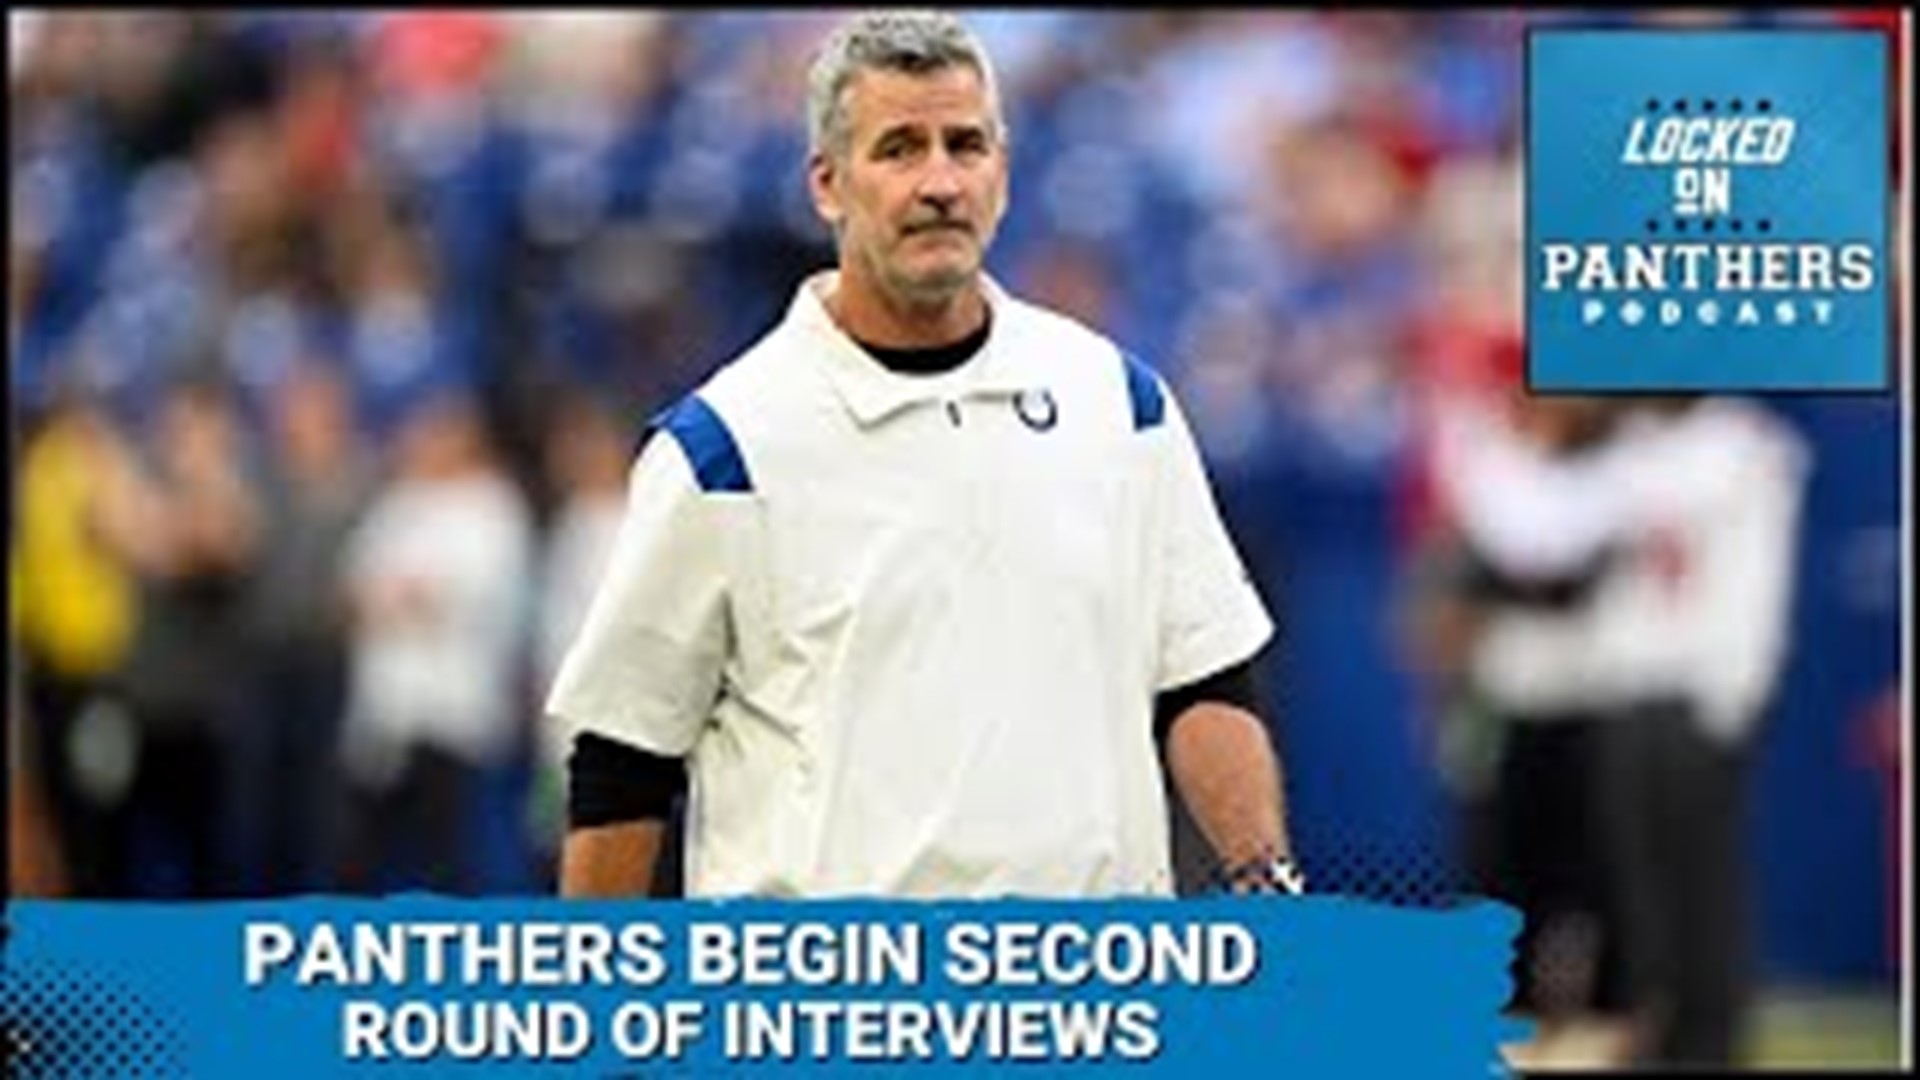 Frank Reich, the first QB in franchise history, has emerged as the favorite according to several national NFL insiders. That and more on Locked On Panthers.